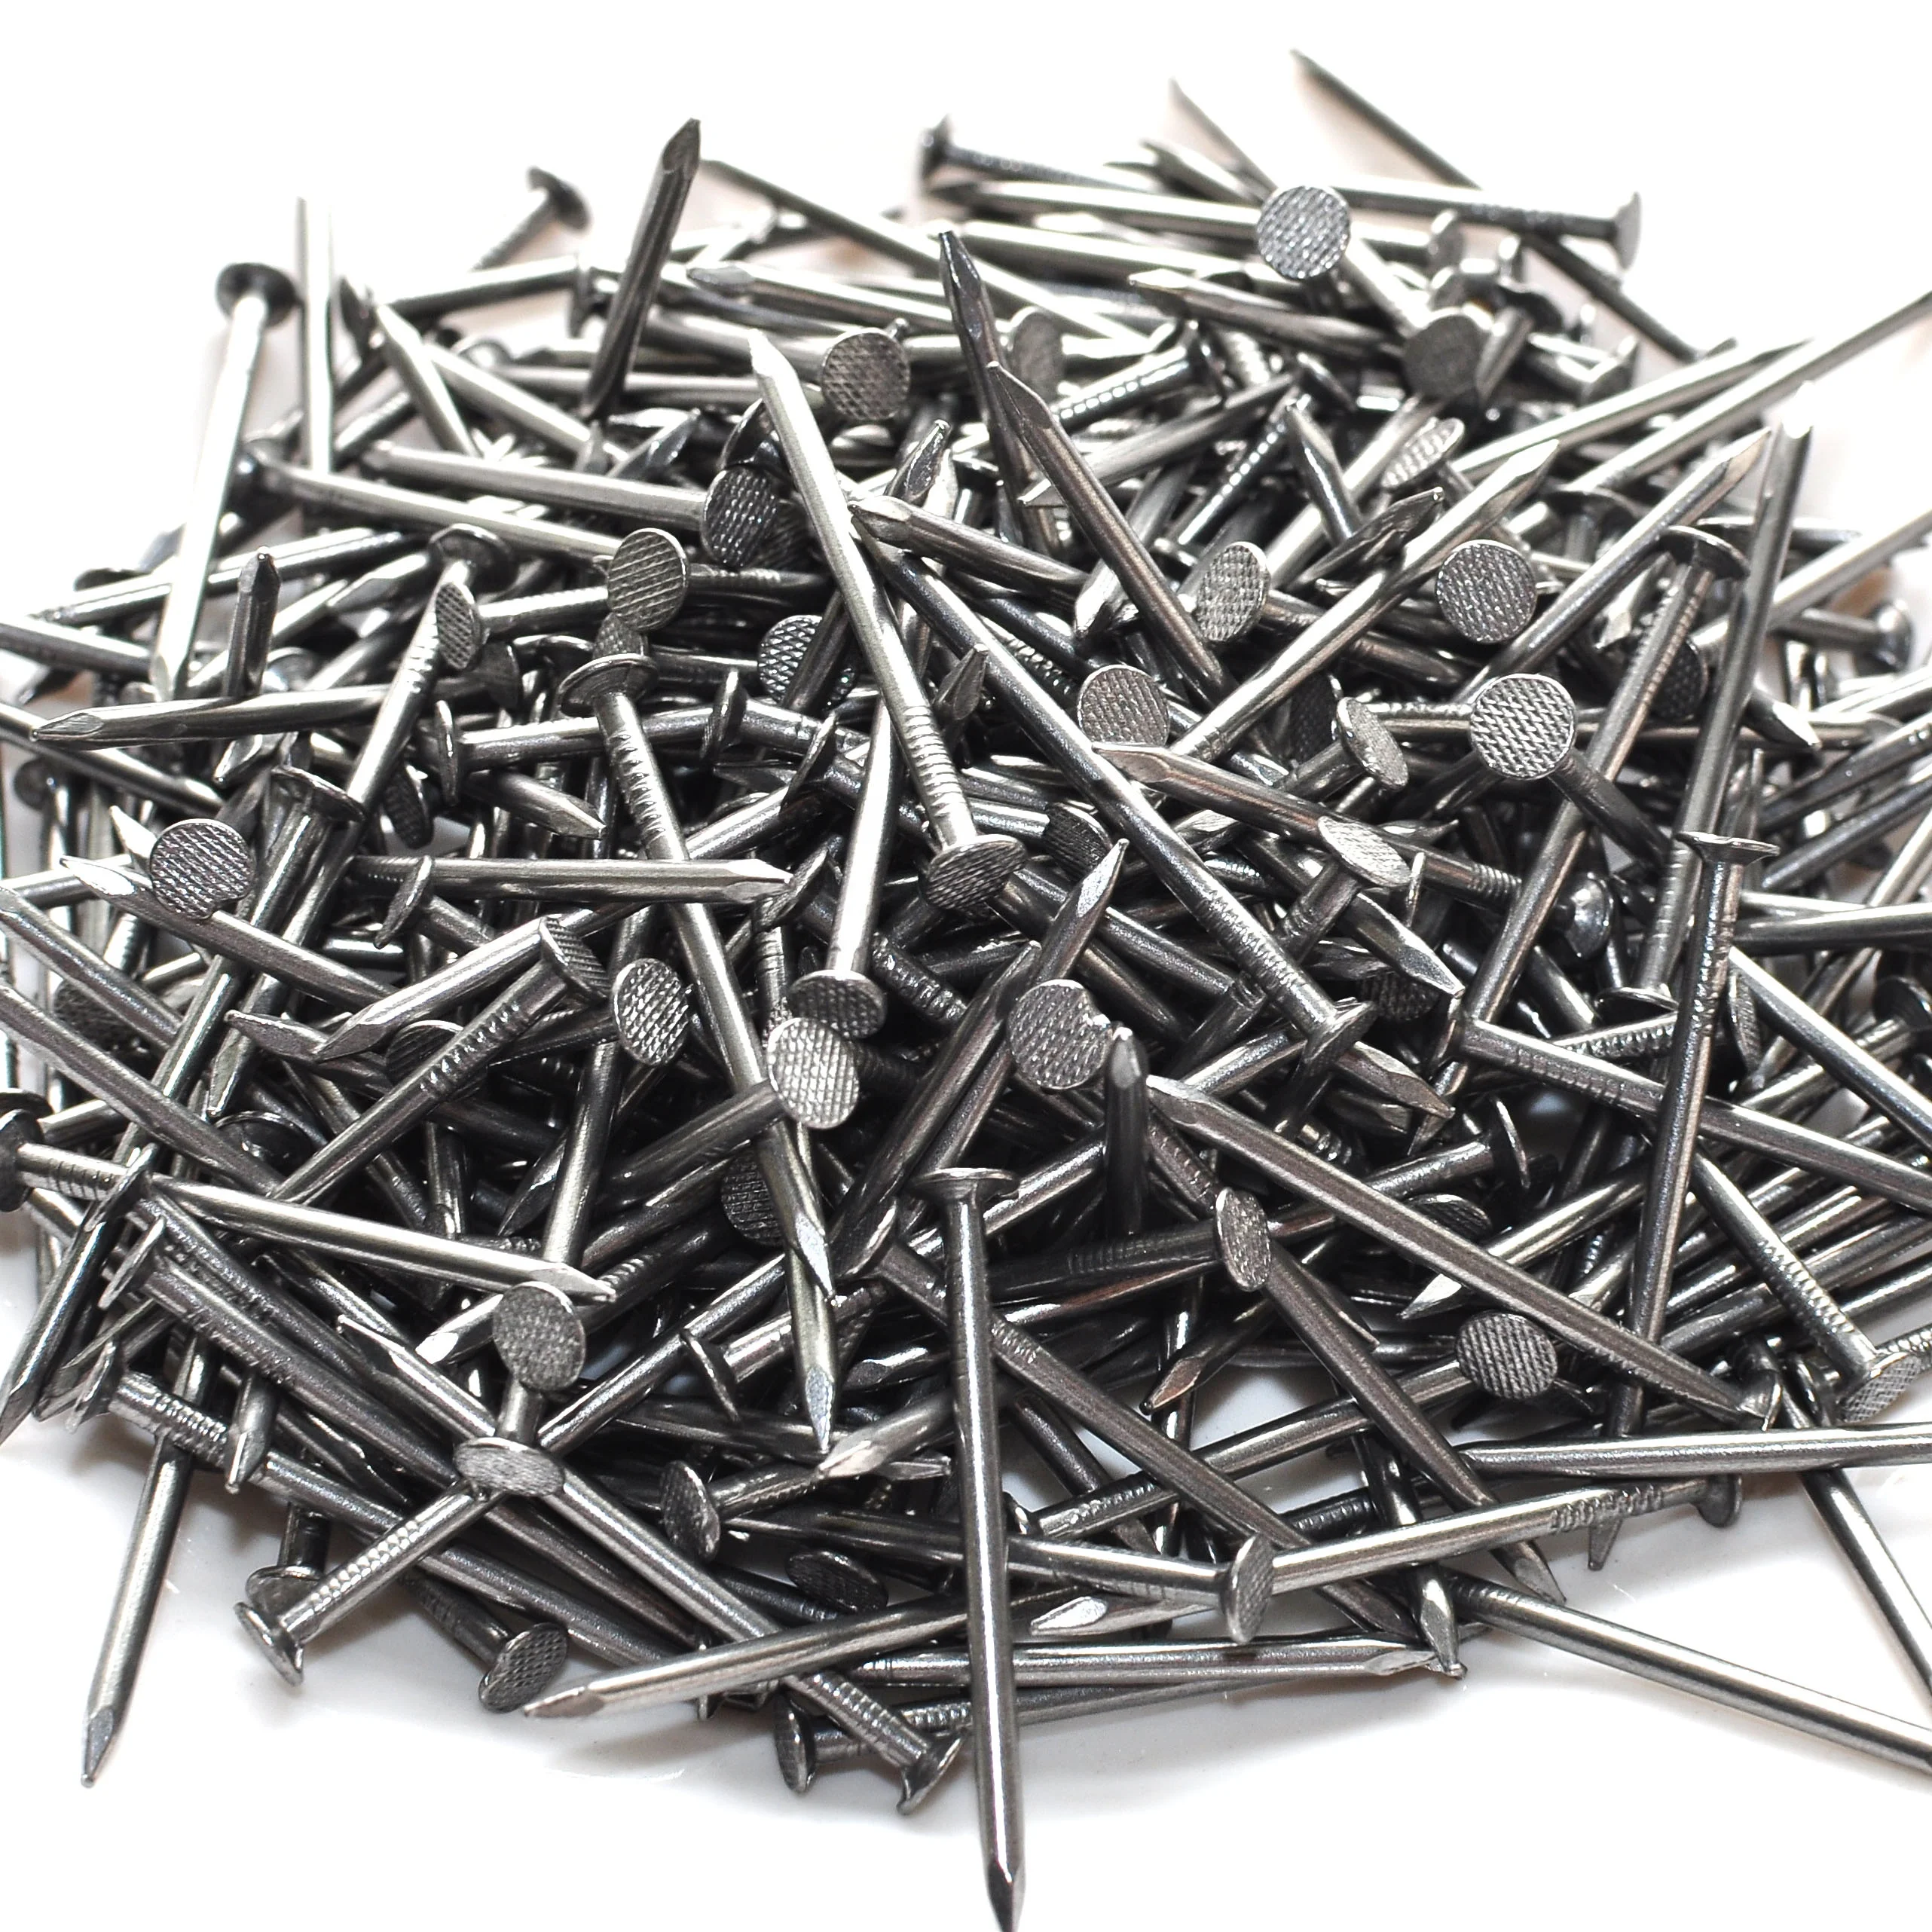 480G Galvanised Round Wire Nails Nail Koelner High Quality Various Sizes 